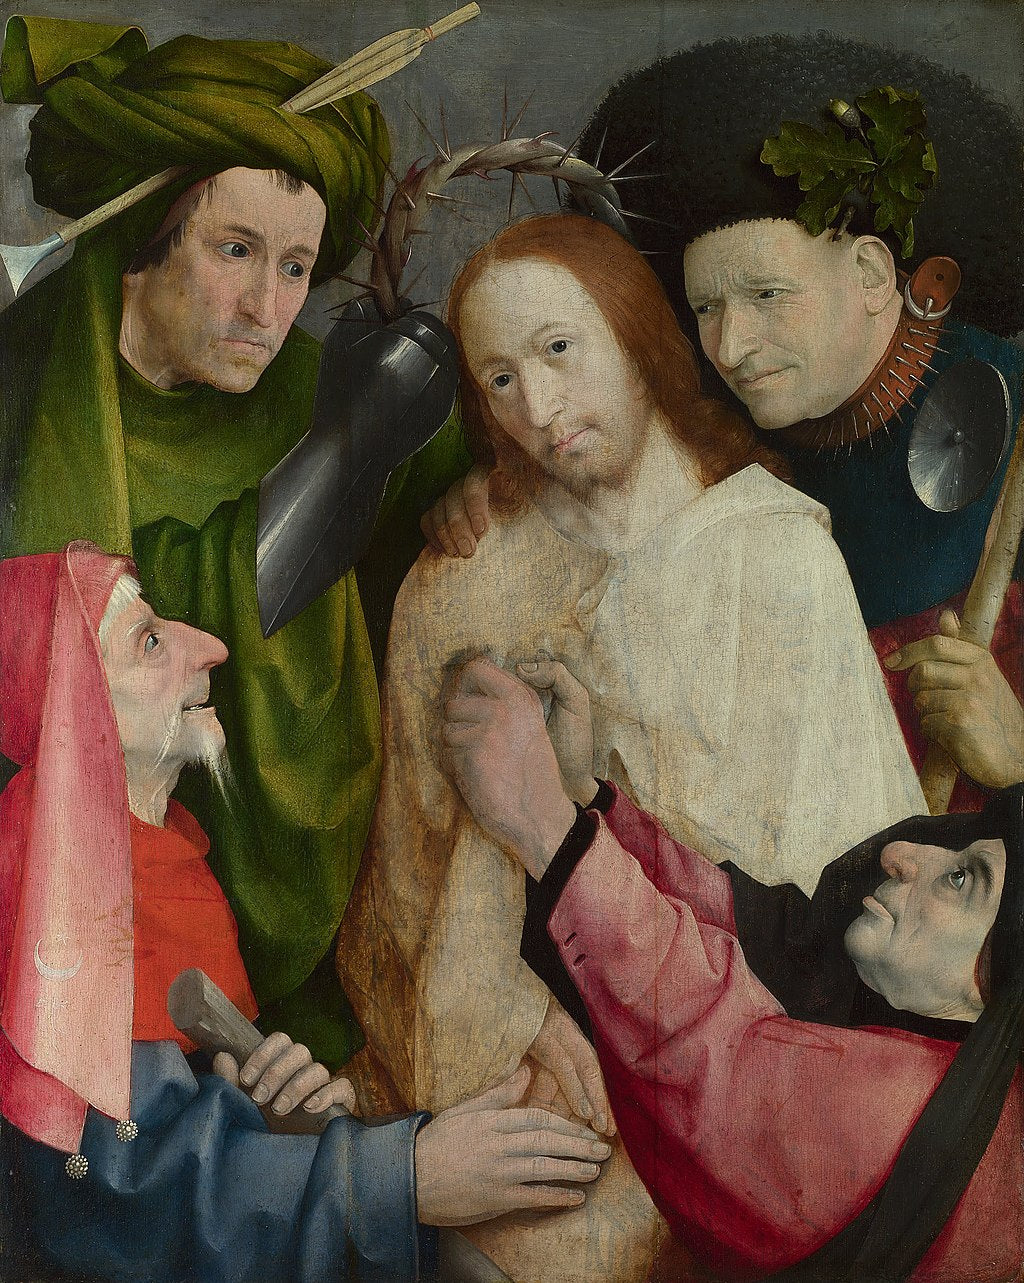 Christ Crowned with Thorns (Bosch, London) by Hieronymus Bosch Reproduction Oil on Canvas